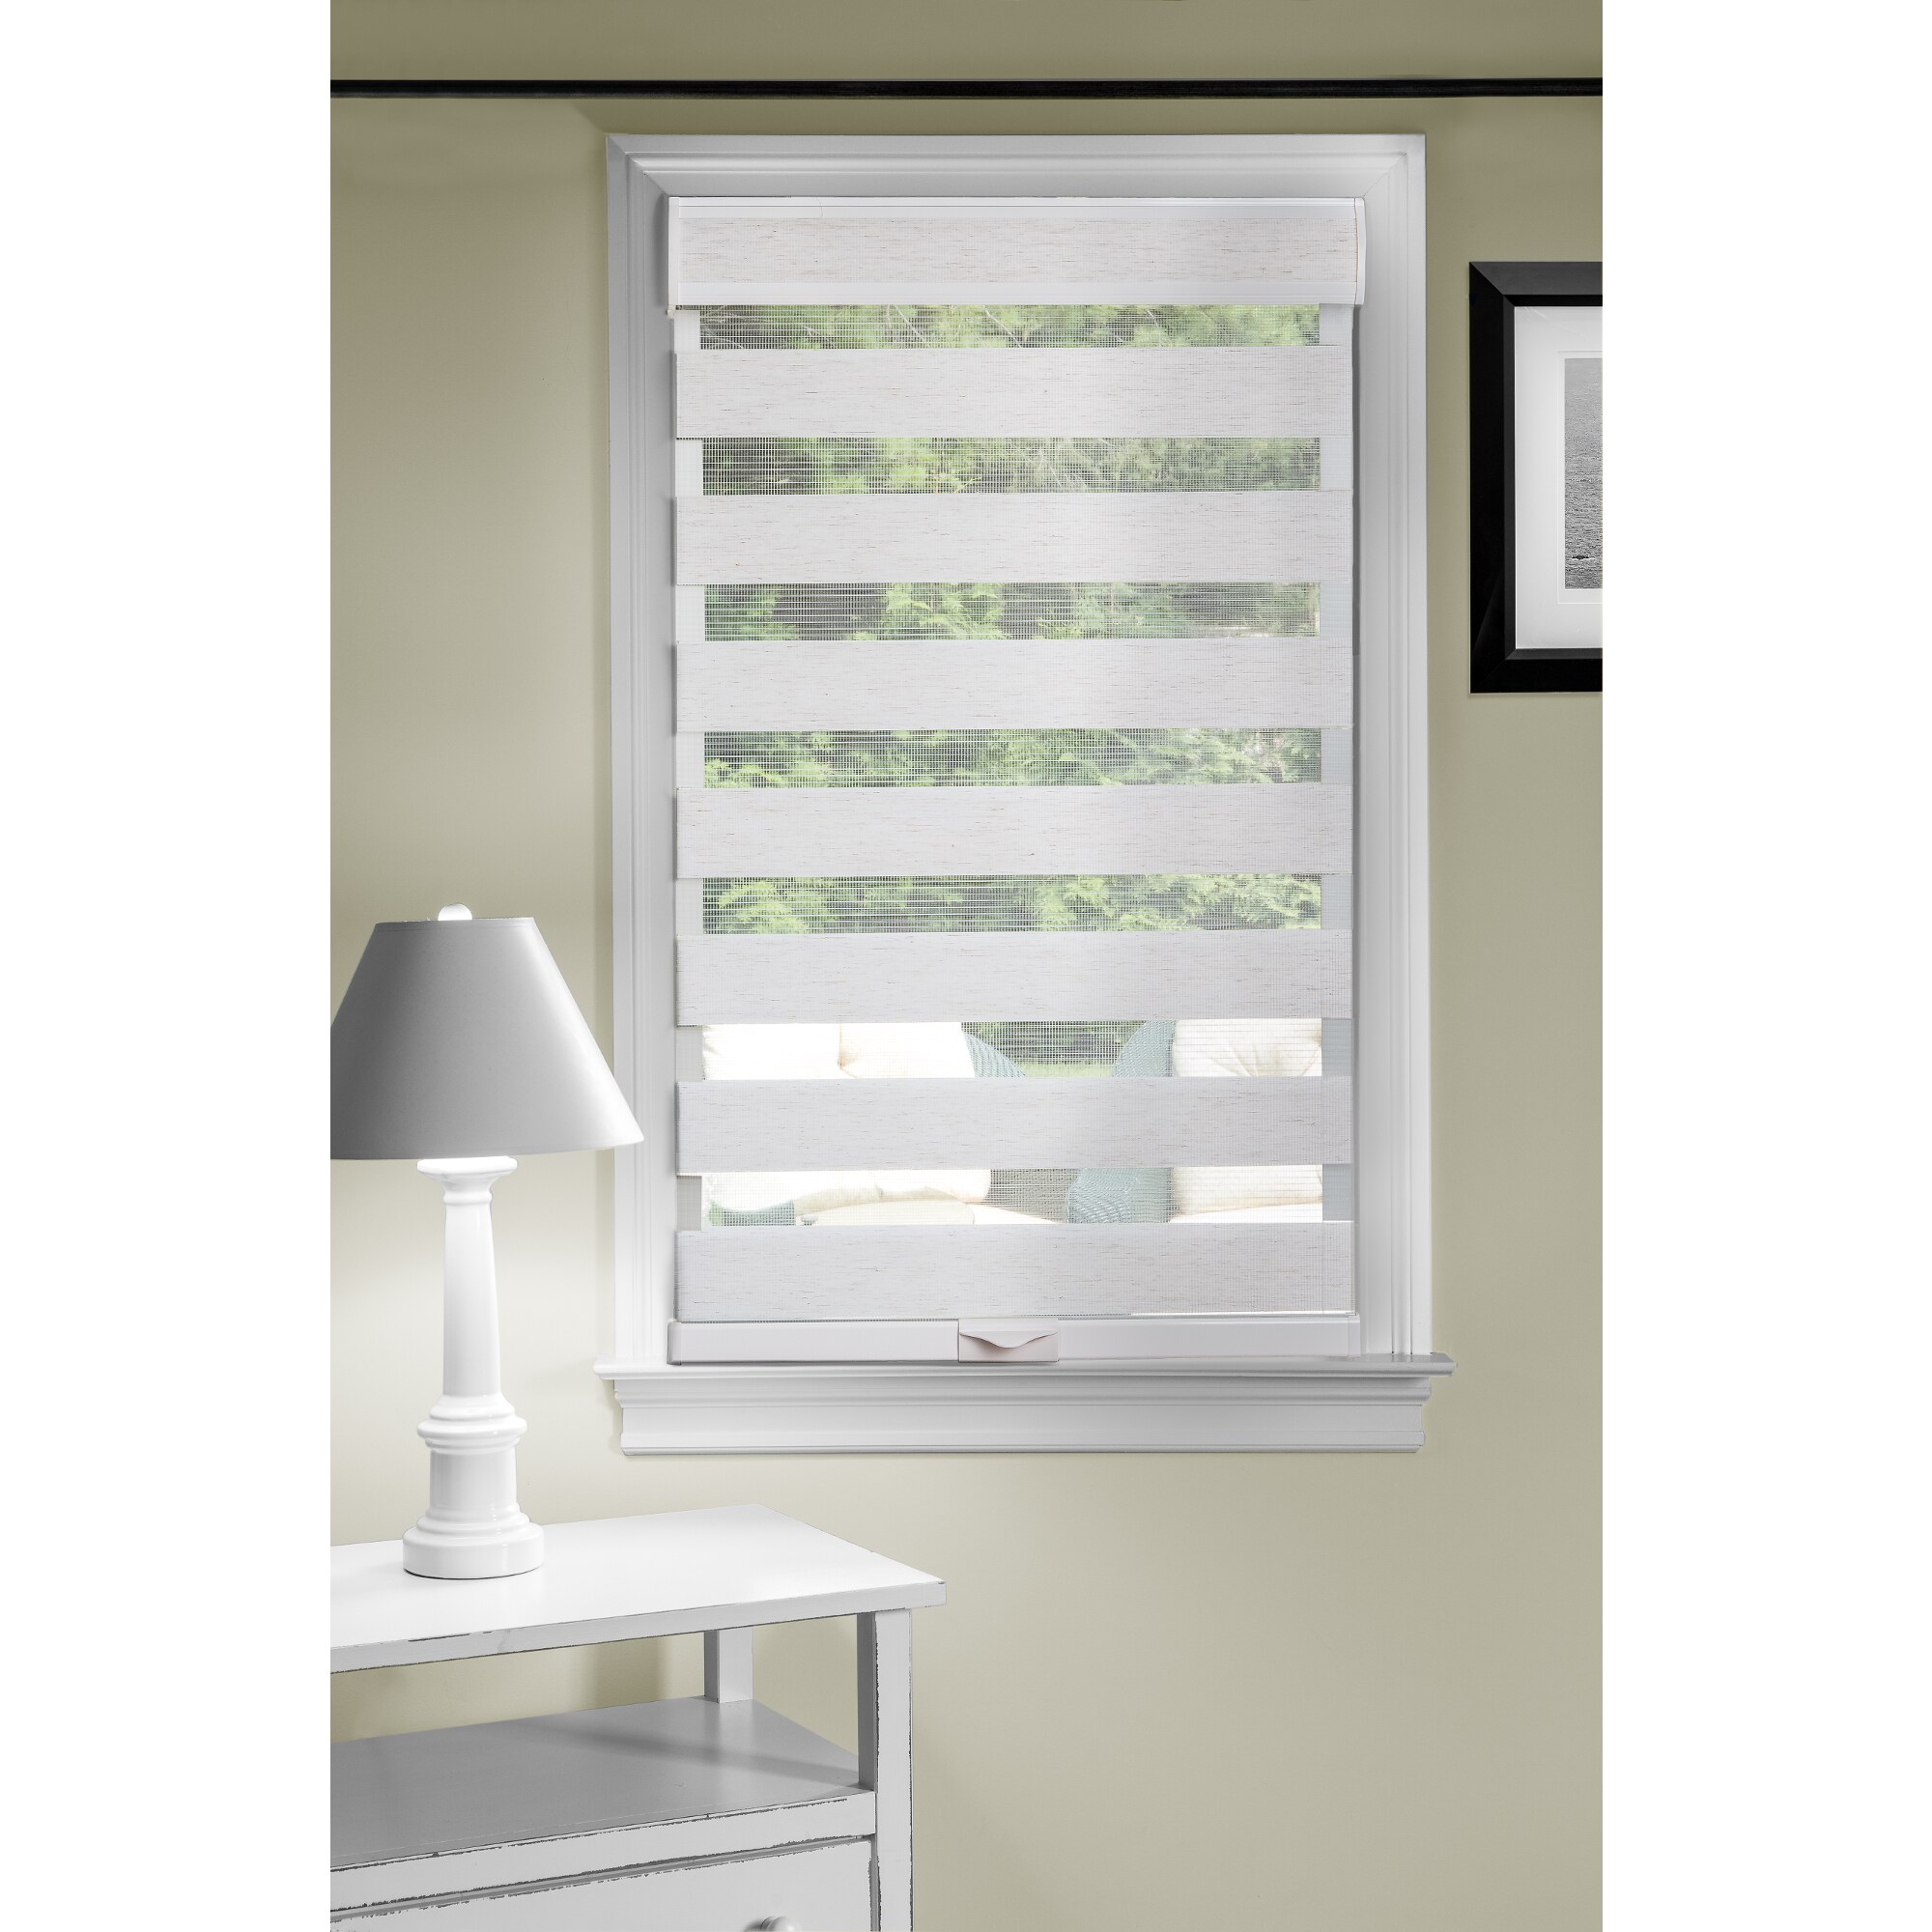 Sheer or Privacy 64"W X 72"H White Cordless Zebra Roller Blinds Sheer Shades 